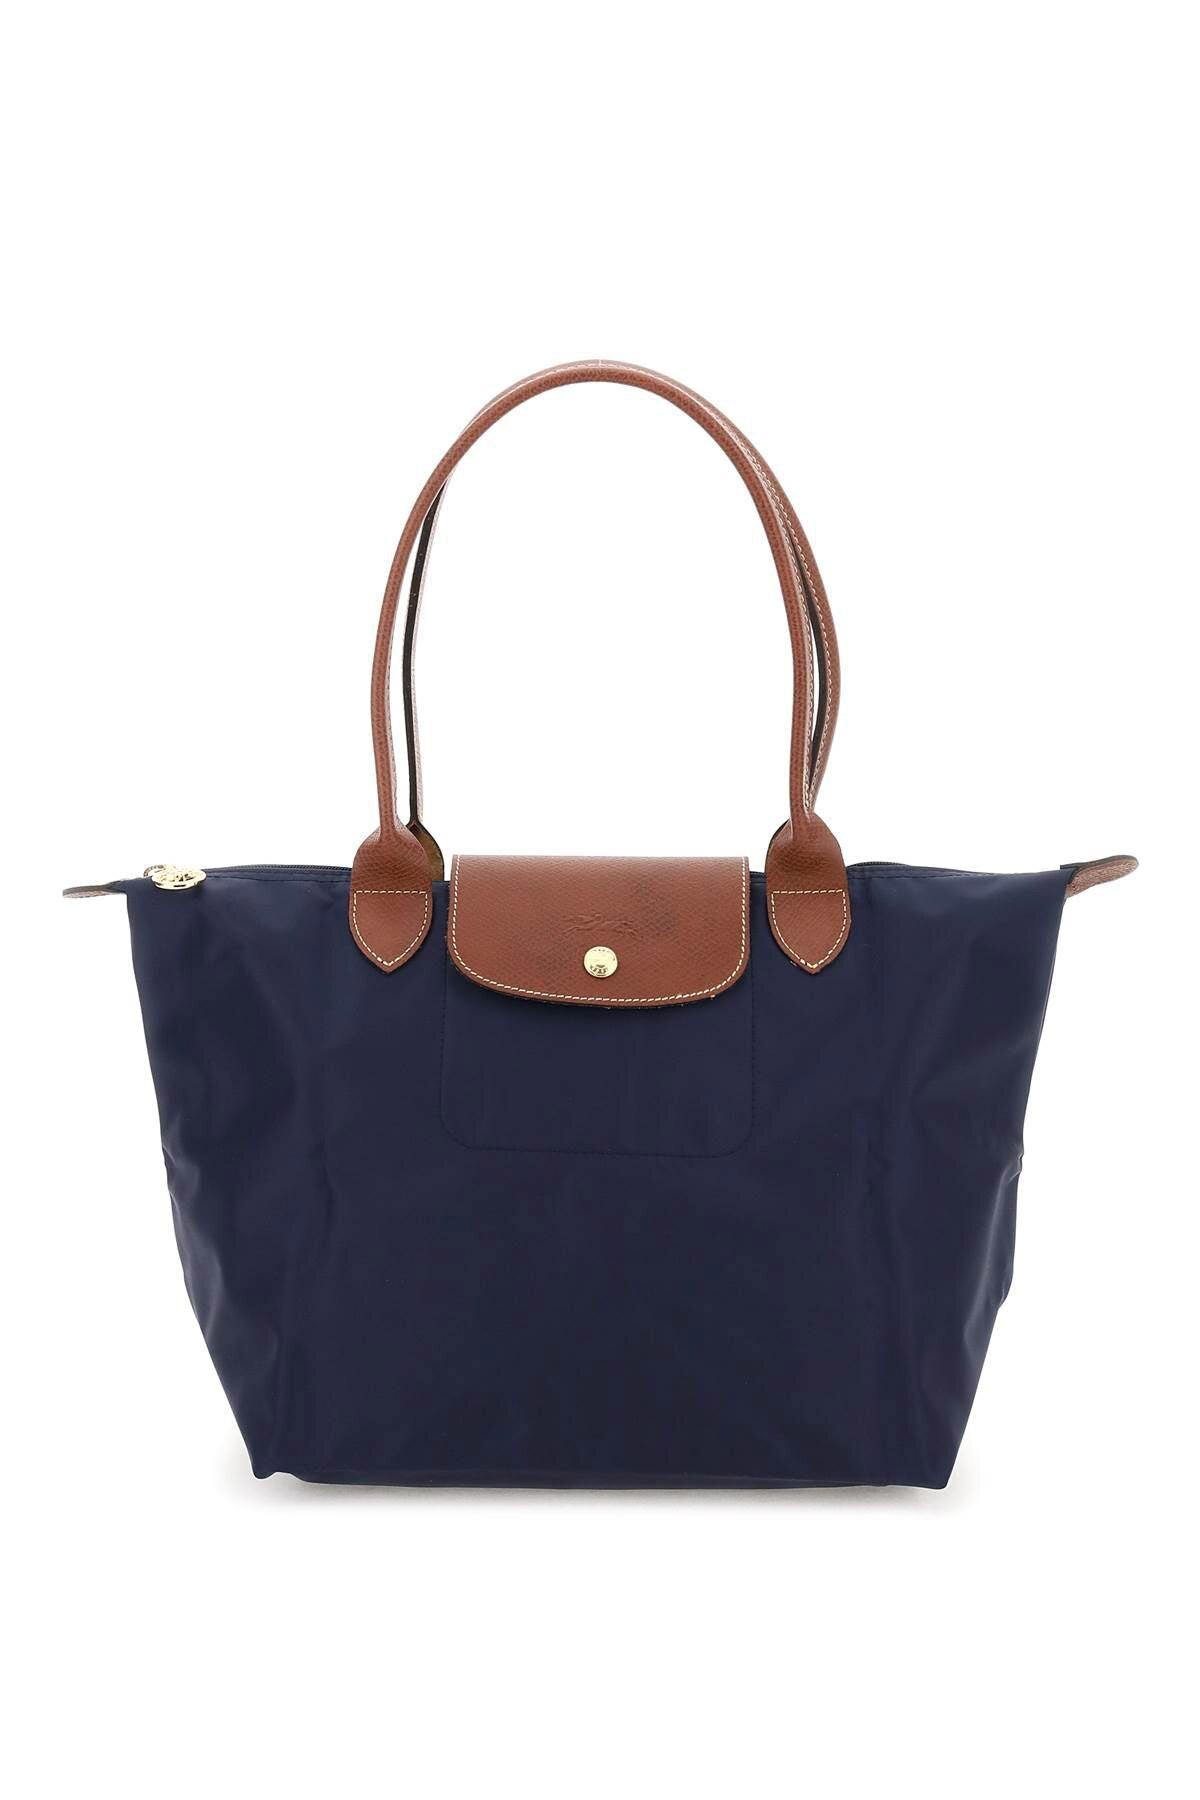 Longchamp Small Le Pliage Shopping Bag in Blue | Lyst